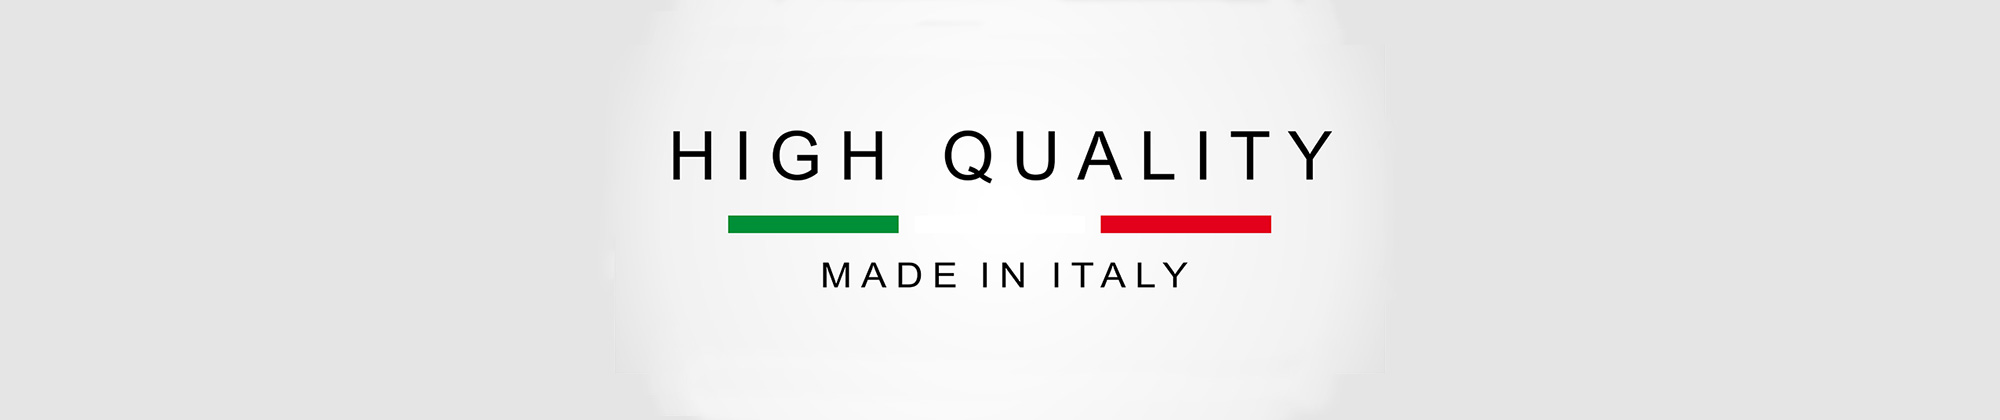 Automation service group High Quality Made in Italy